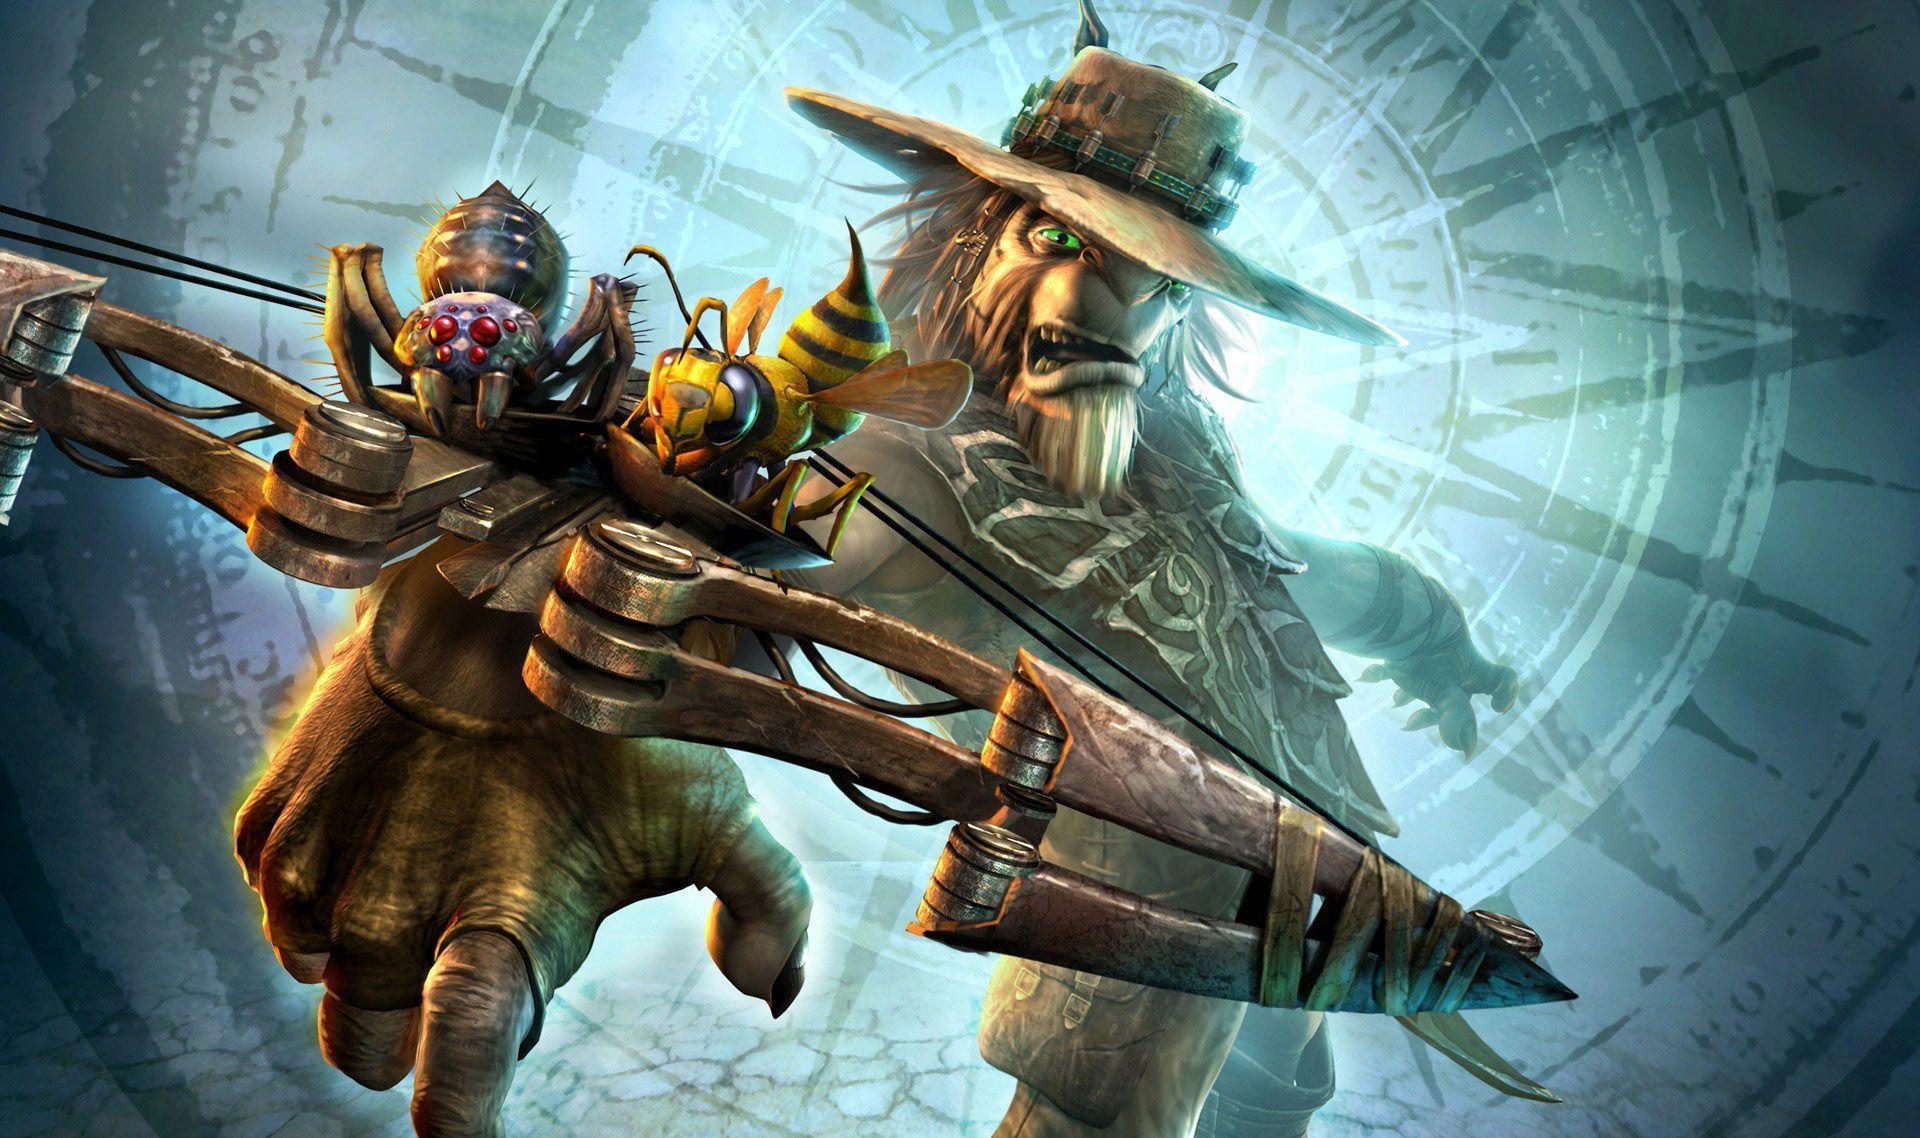 oddworld-ios-mac-games-drop-to-1-stranger-s-wrath-new-n-tasty-and-more-9to5toys